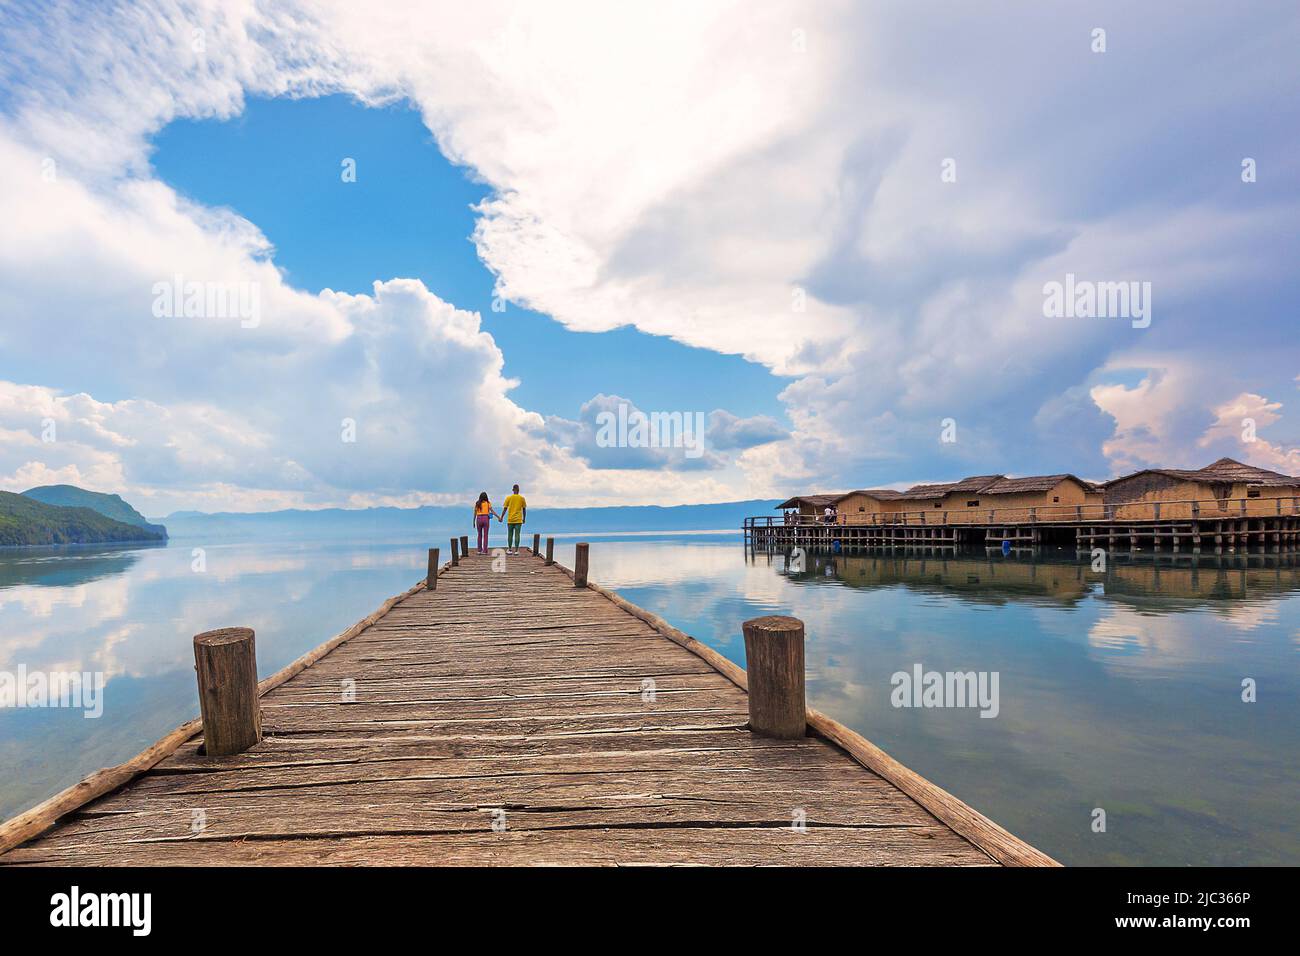 Wooden pier and cloudscape with a couple at the end of the dock in the bay known as bay of bones in Lake Ohrid, Macedonia. Stock Photo